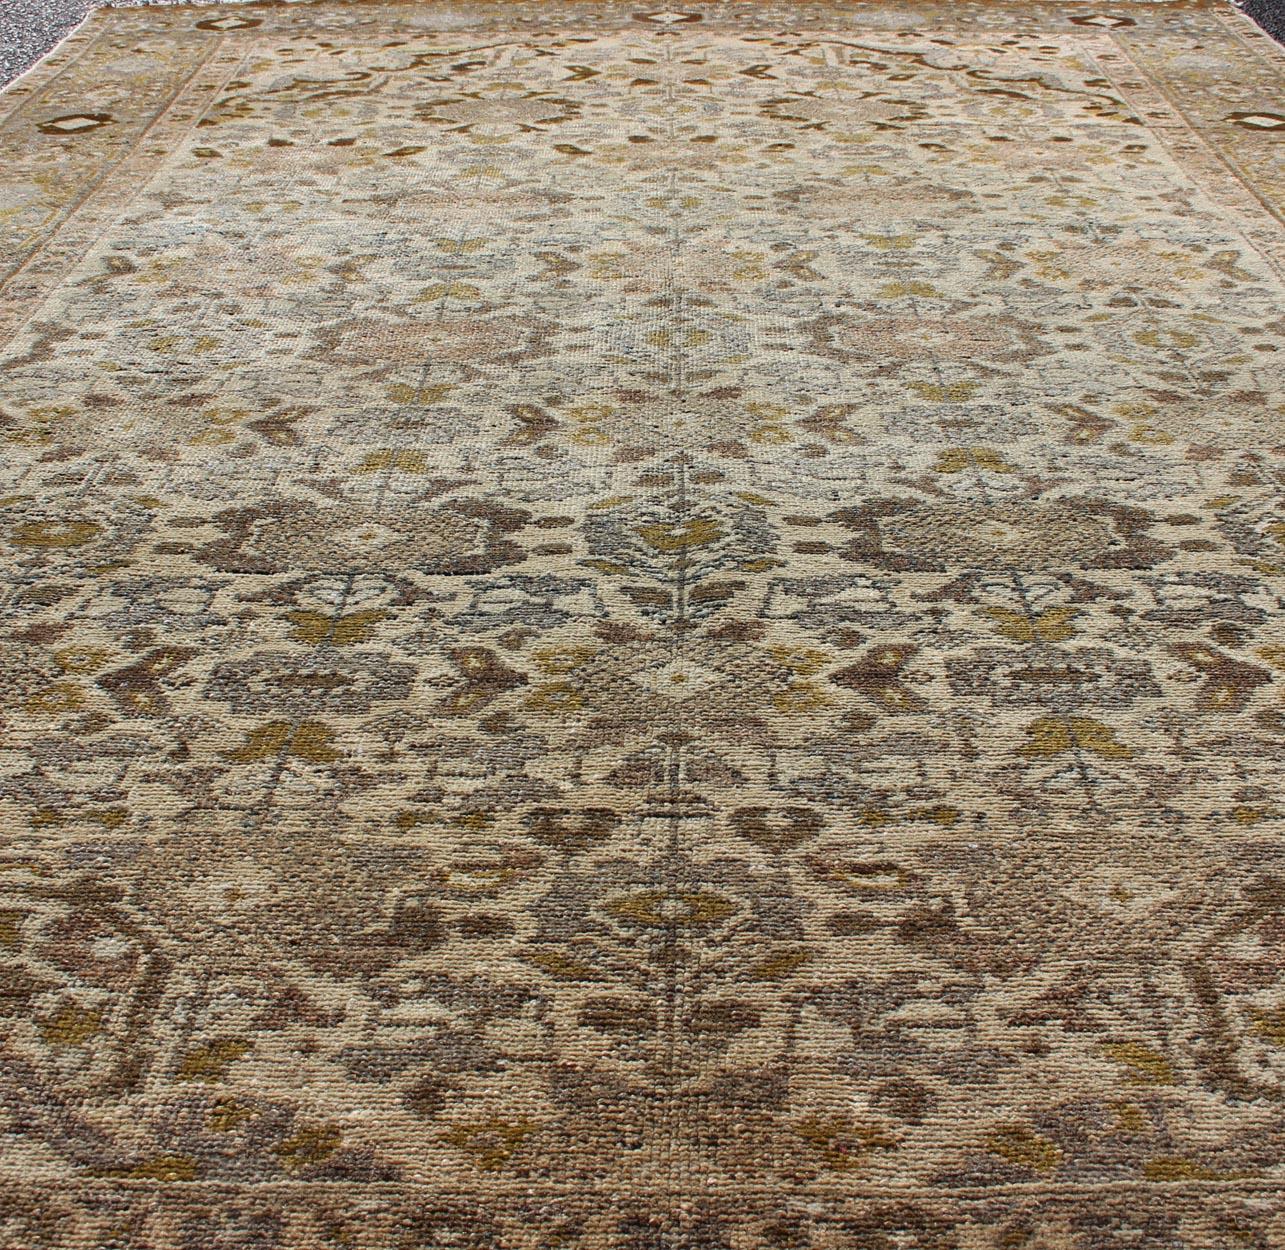 Antique Persian Malayer Rug with All-Over Boteh Design in Earth Tones 4